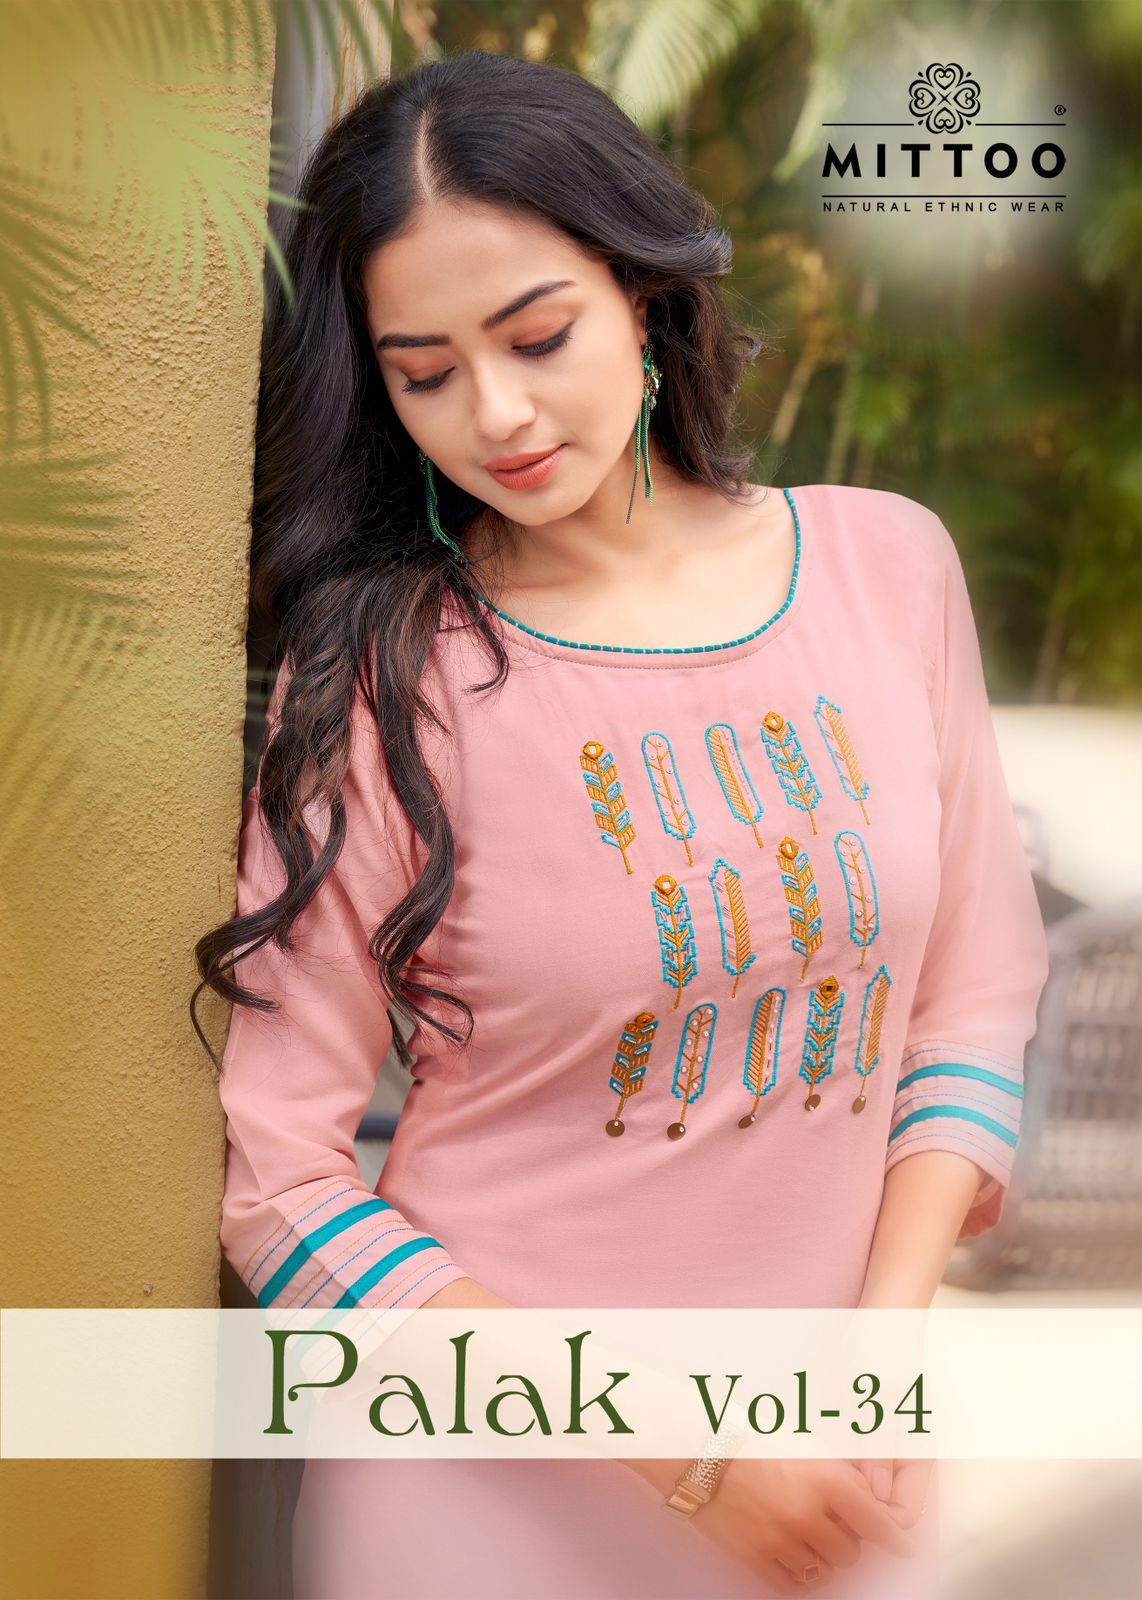 Mittoo Palak Vol 34 collection 11